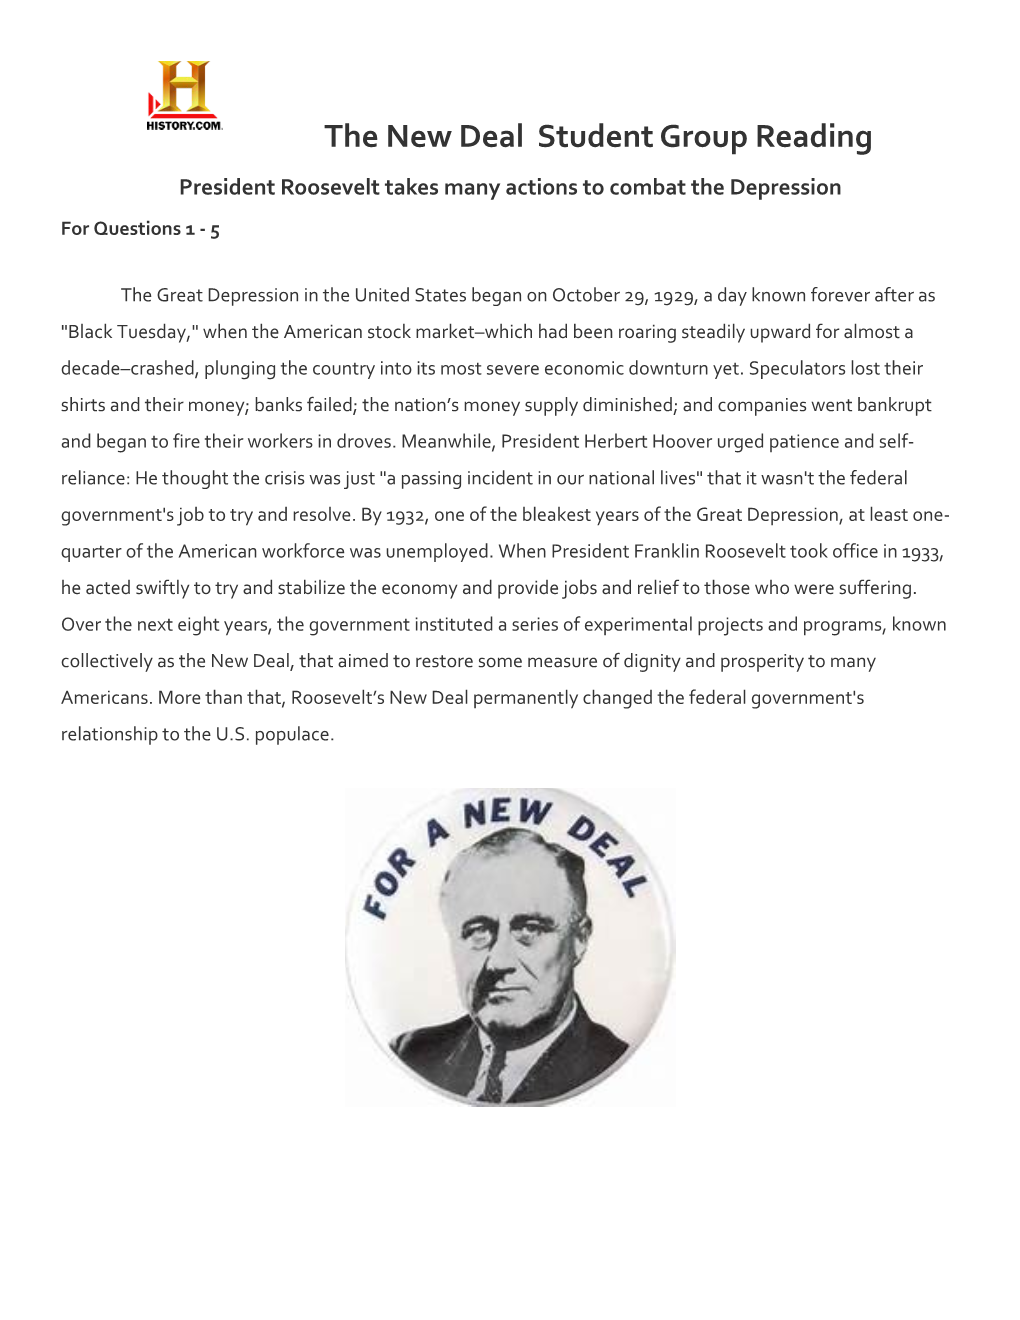 President Roosevelt Takes Many Actions to Combat the Depression